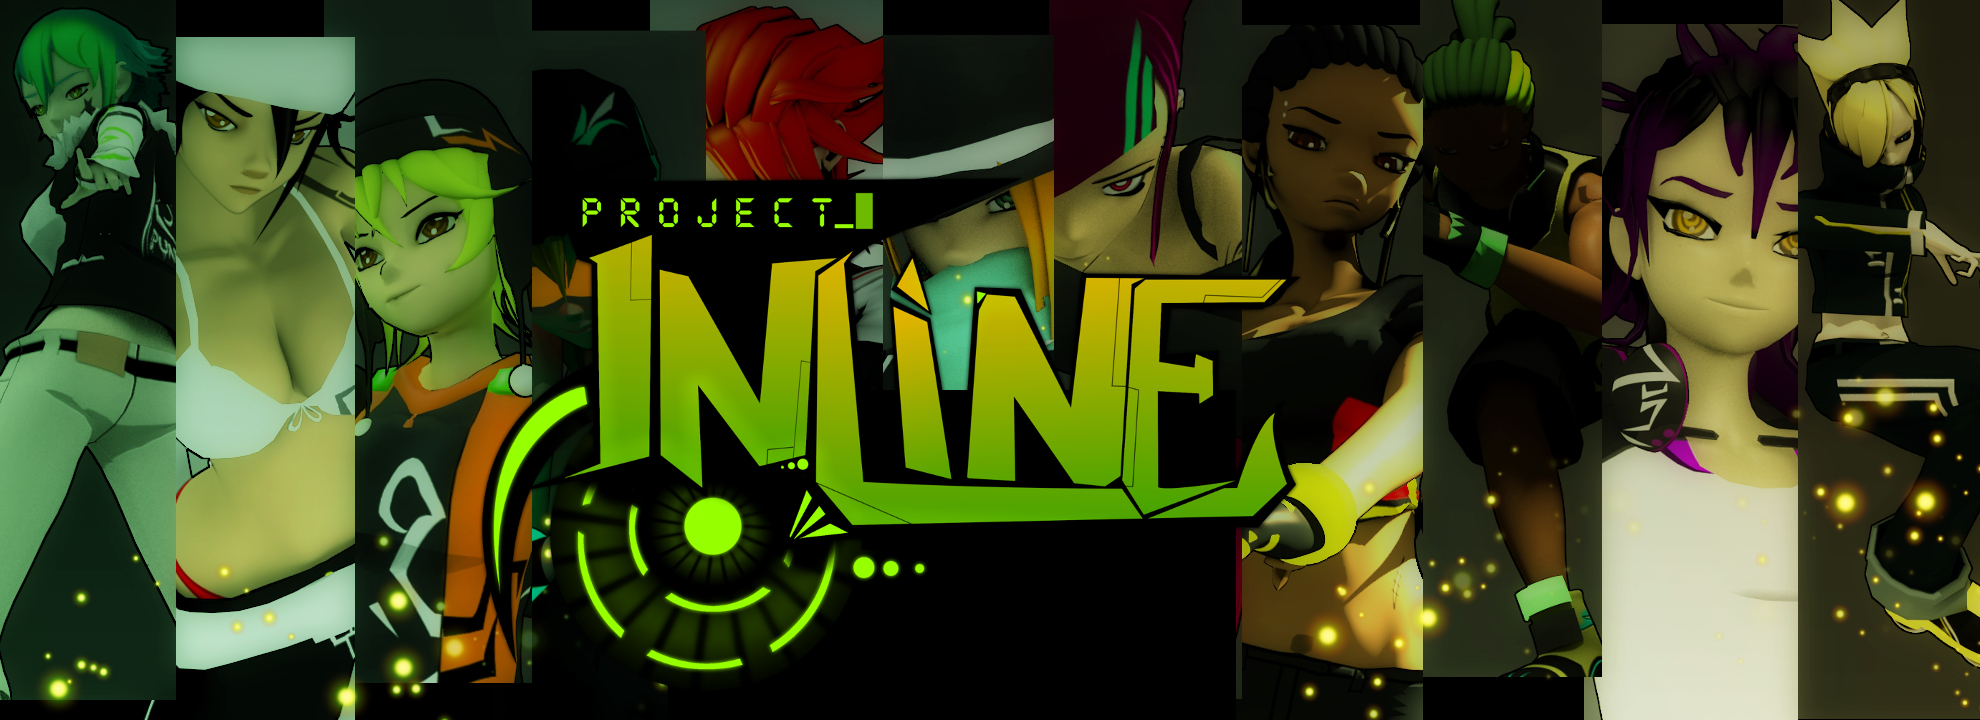 Project Inline